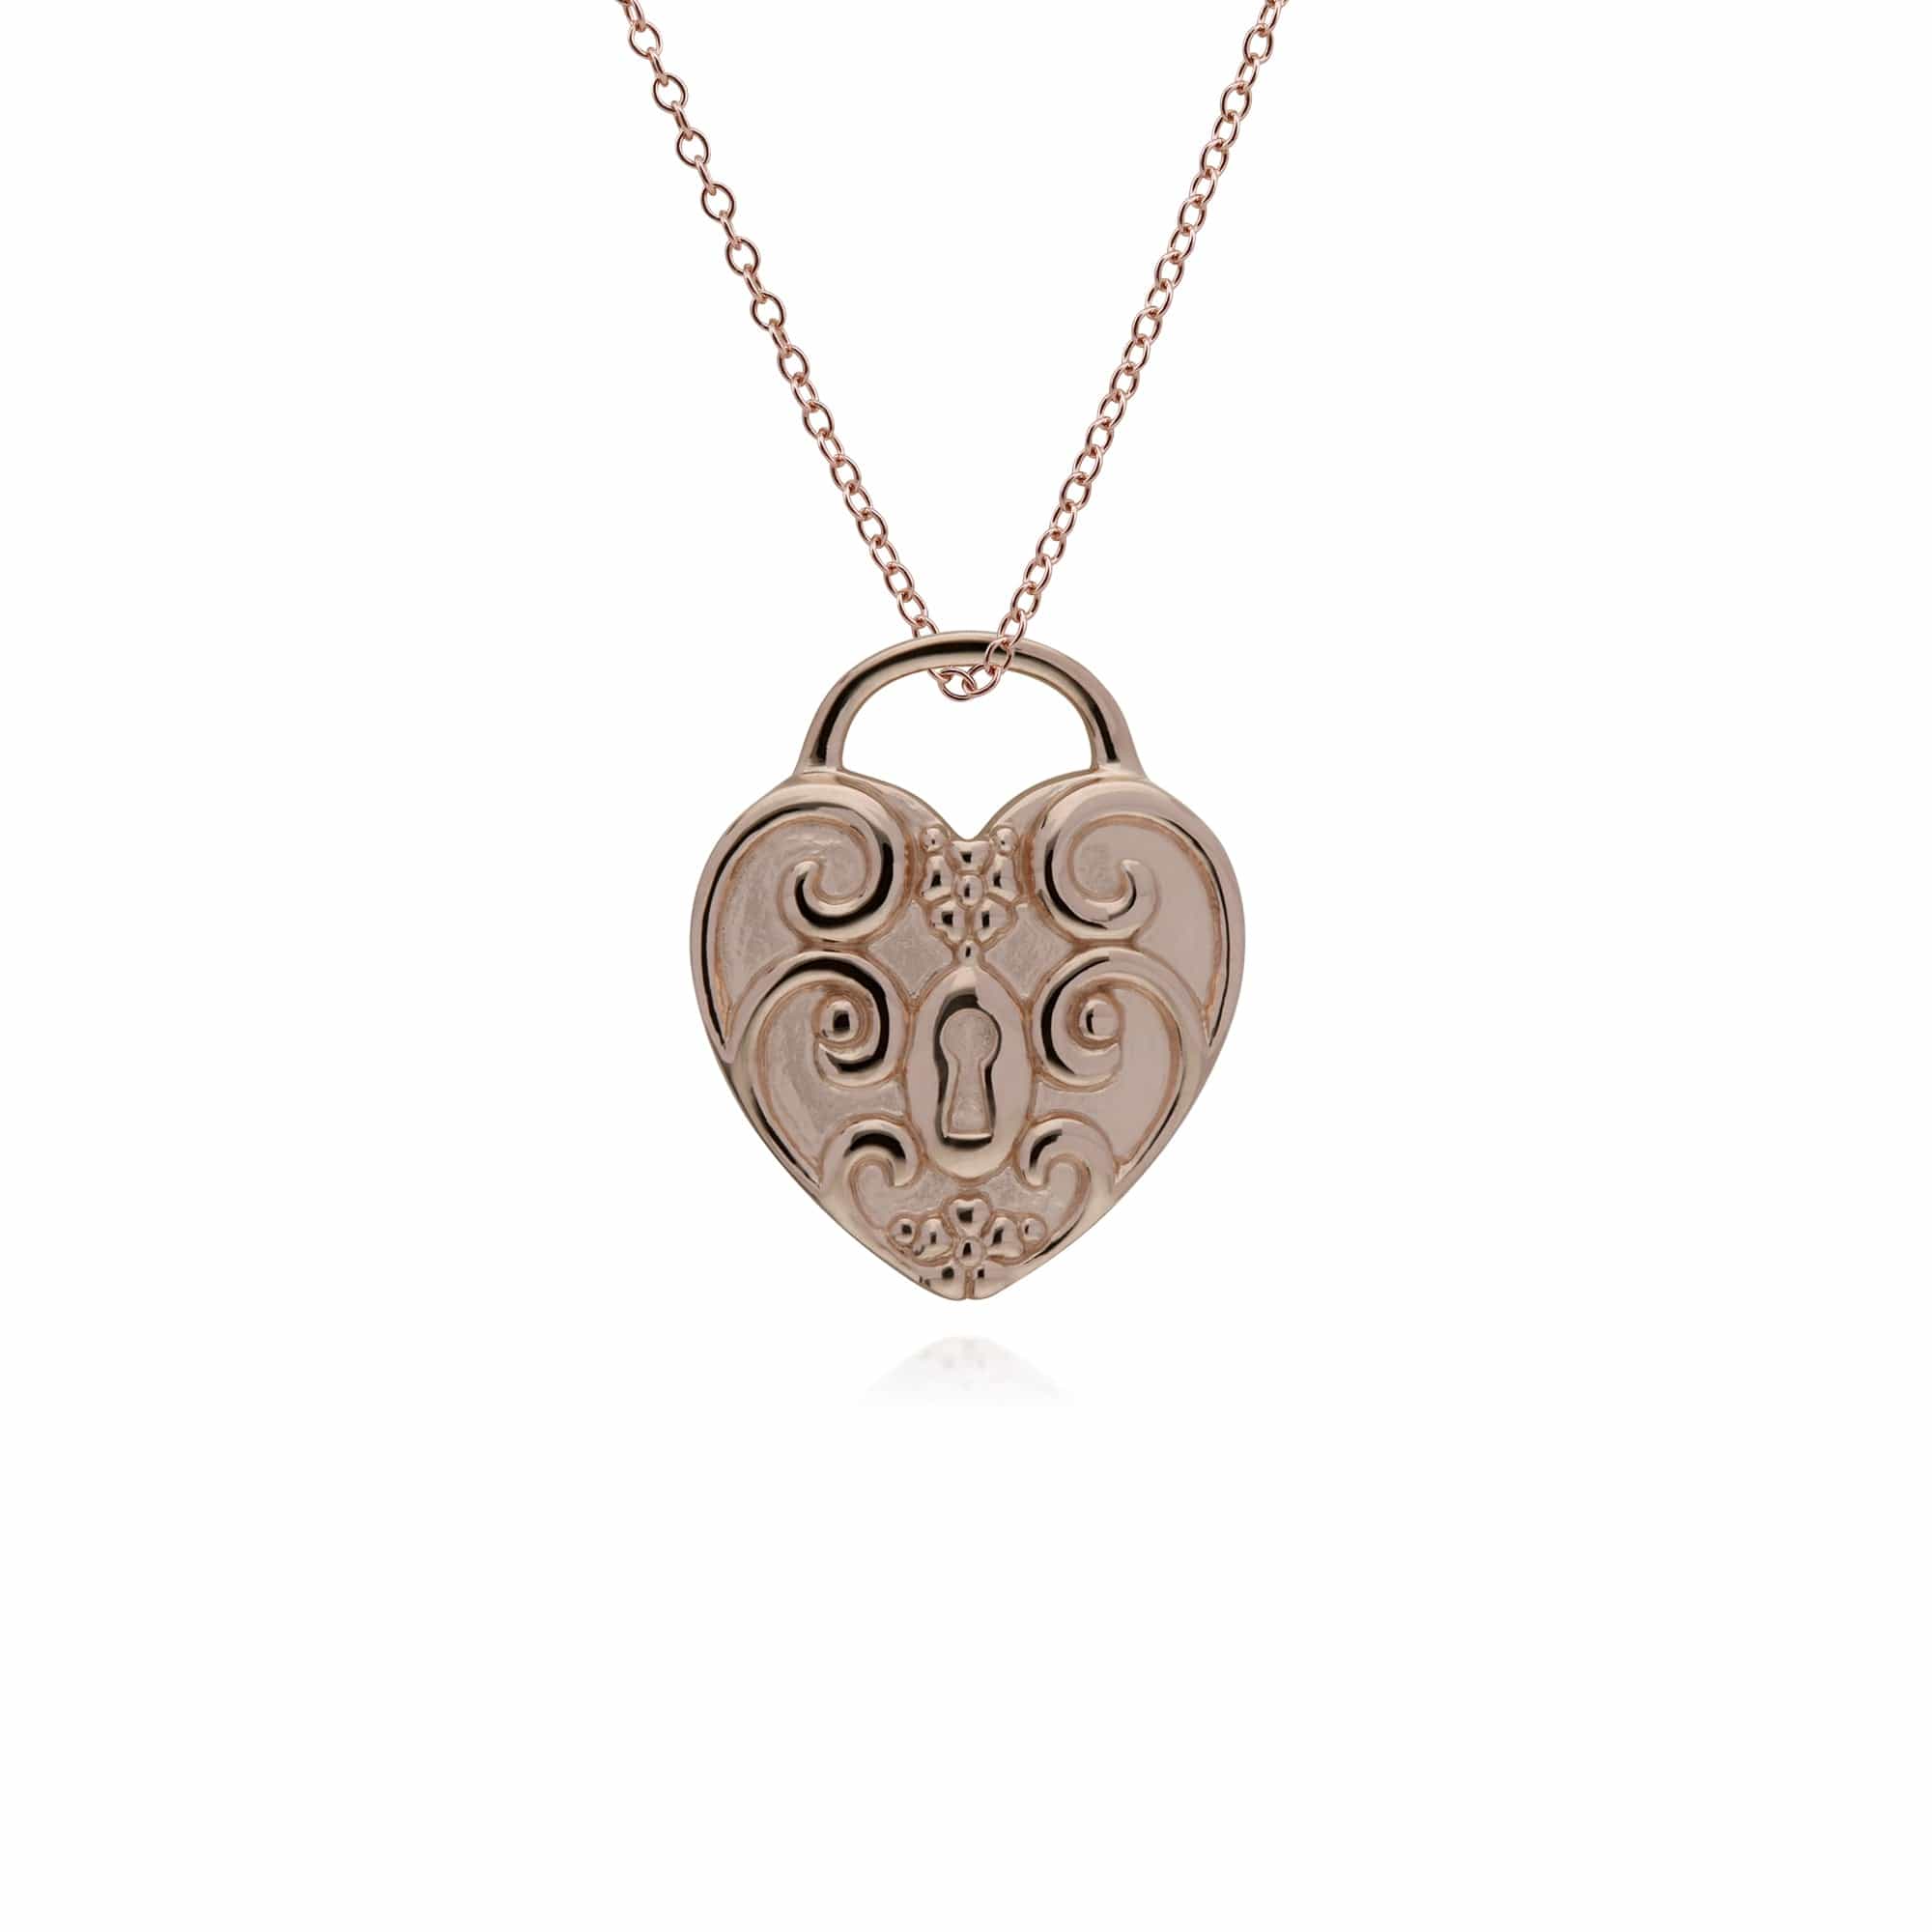 270P026101925-270P026501925 Classic Swirl Heart Lock Pendant & Pearl Big Key Charm in Rose Gold Plated 925 Sterling Silver 3